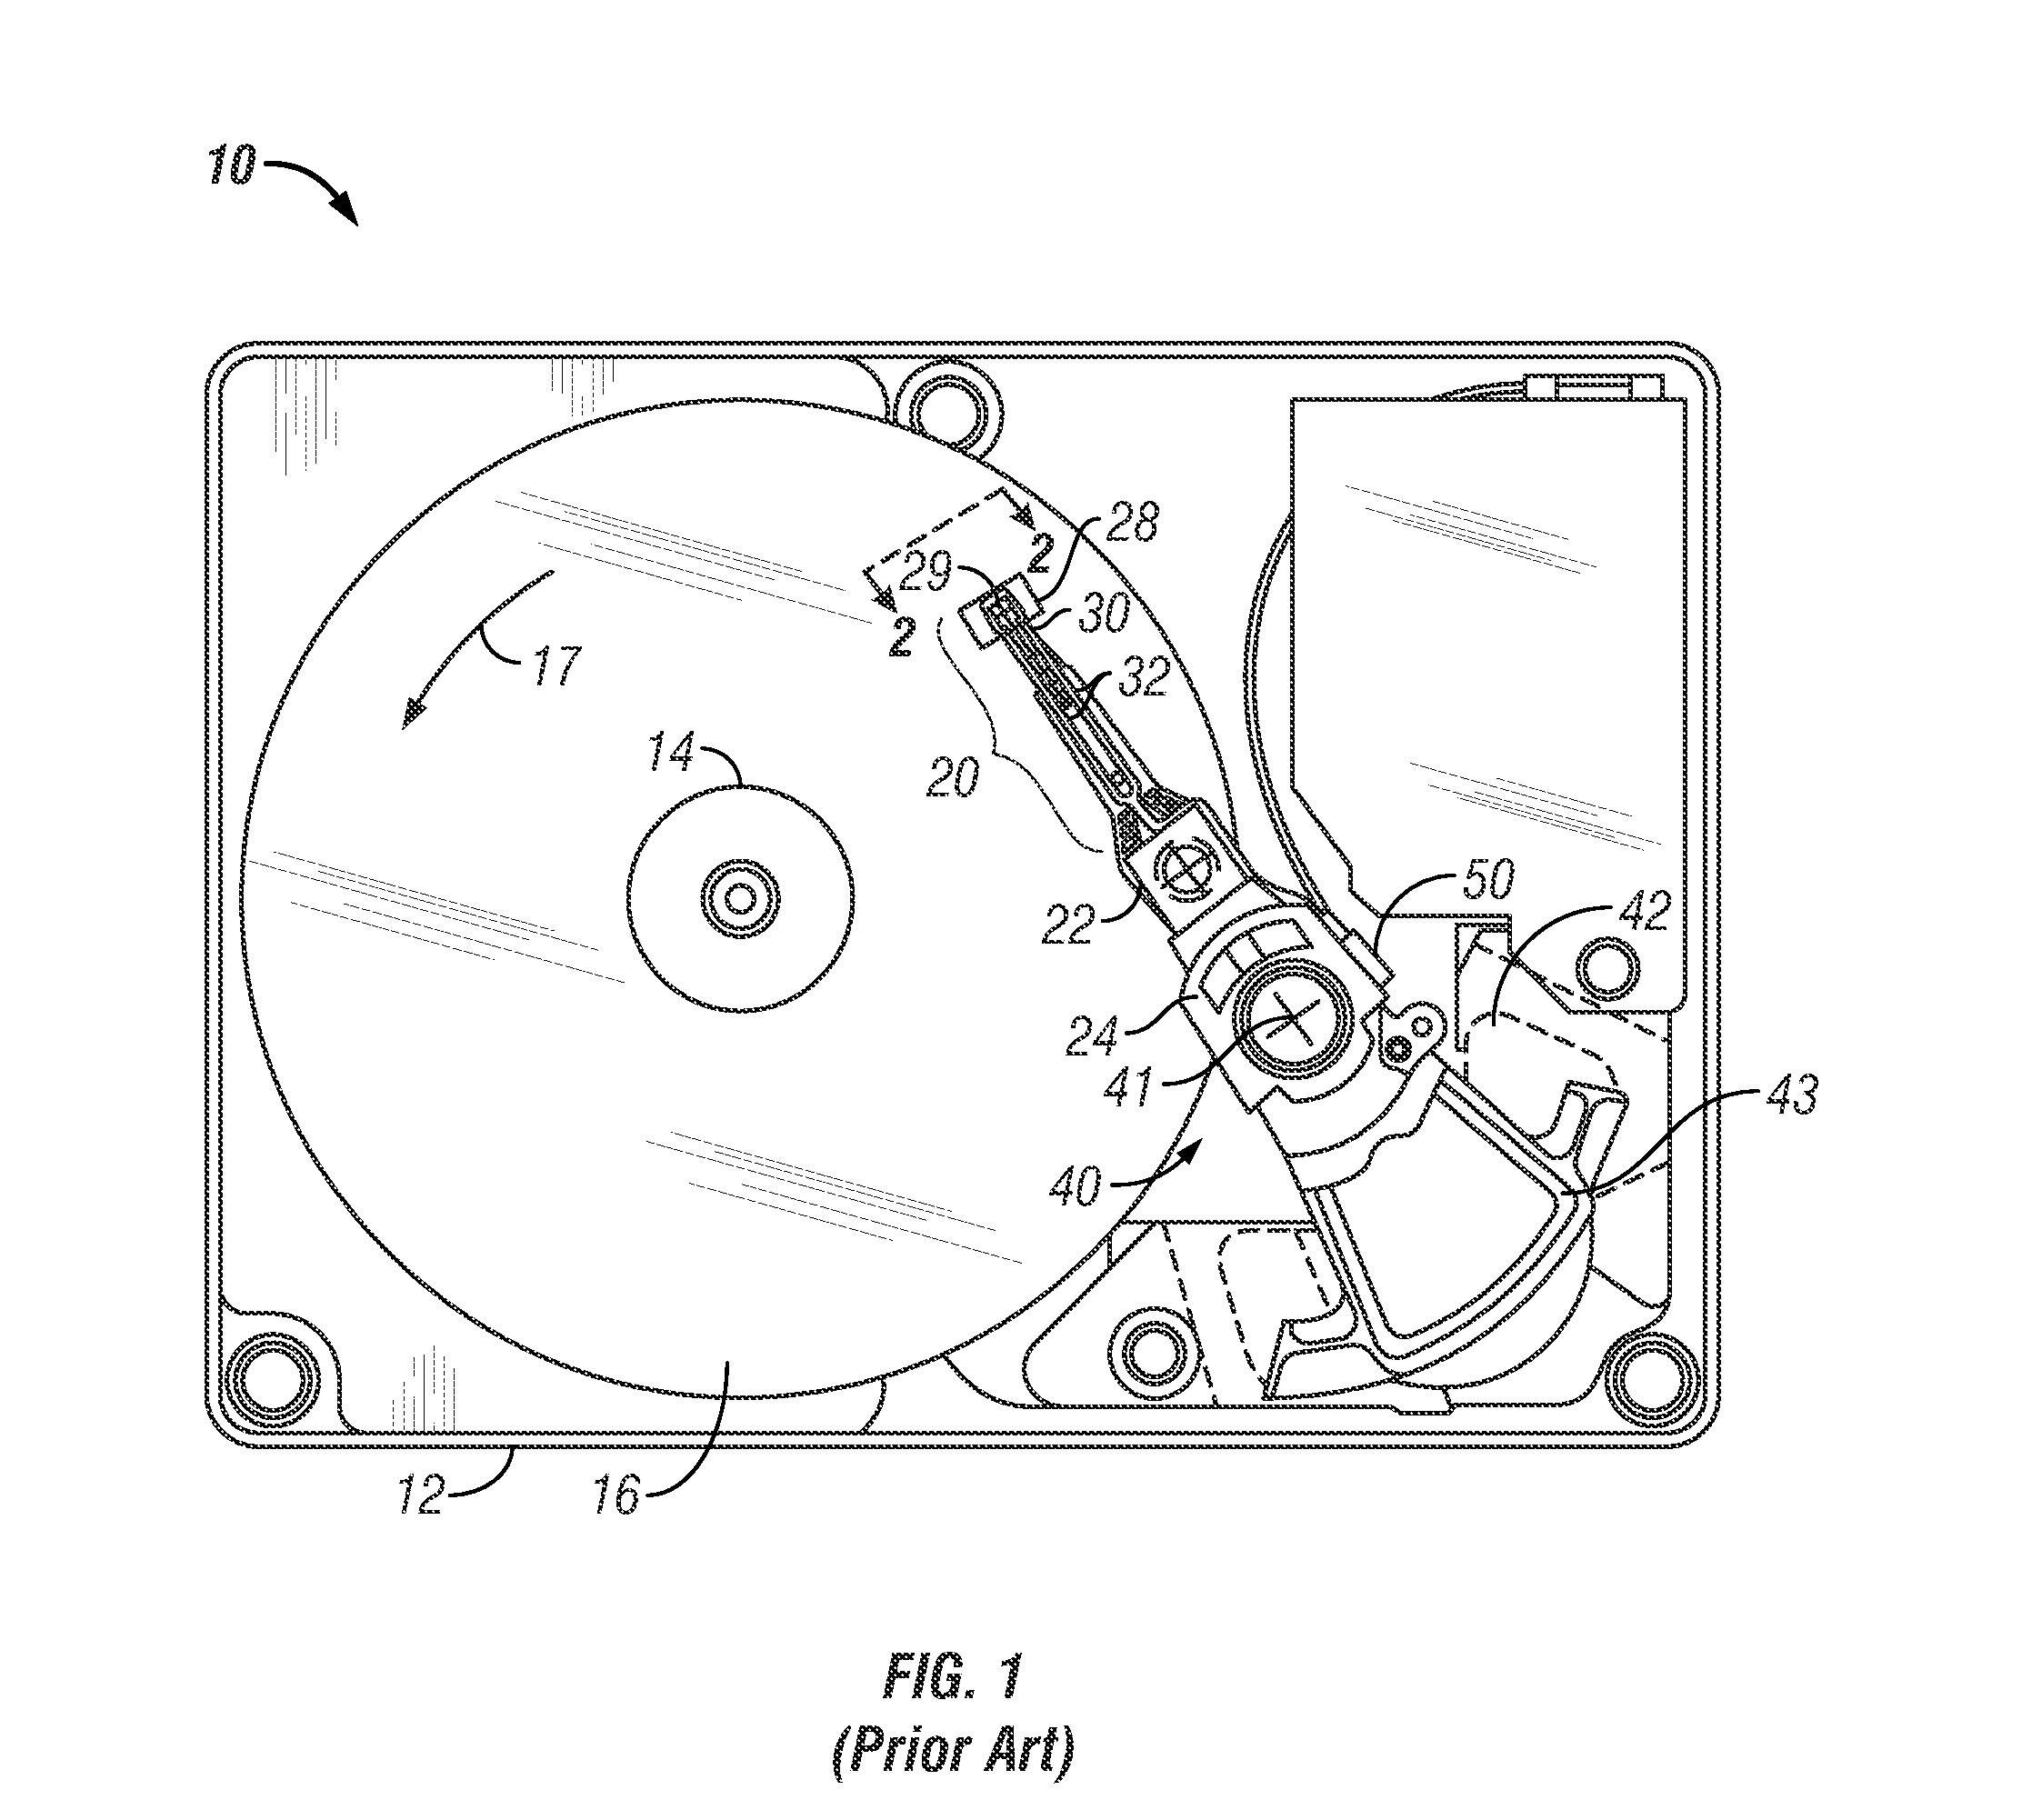 Perpendicular magnetic recording write head with ladder network compensation circuitry on slider body for write current overshoot at write current switching